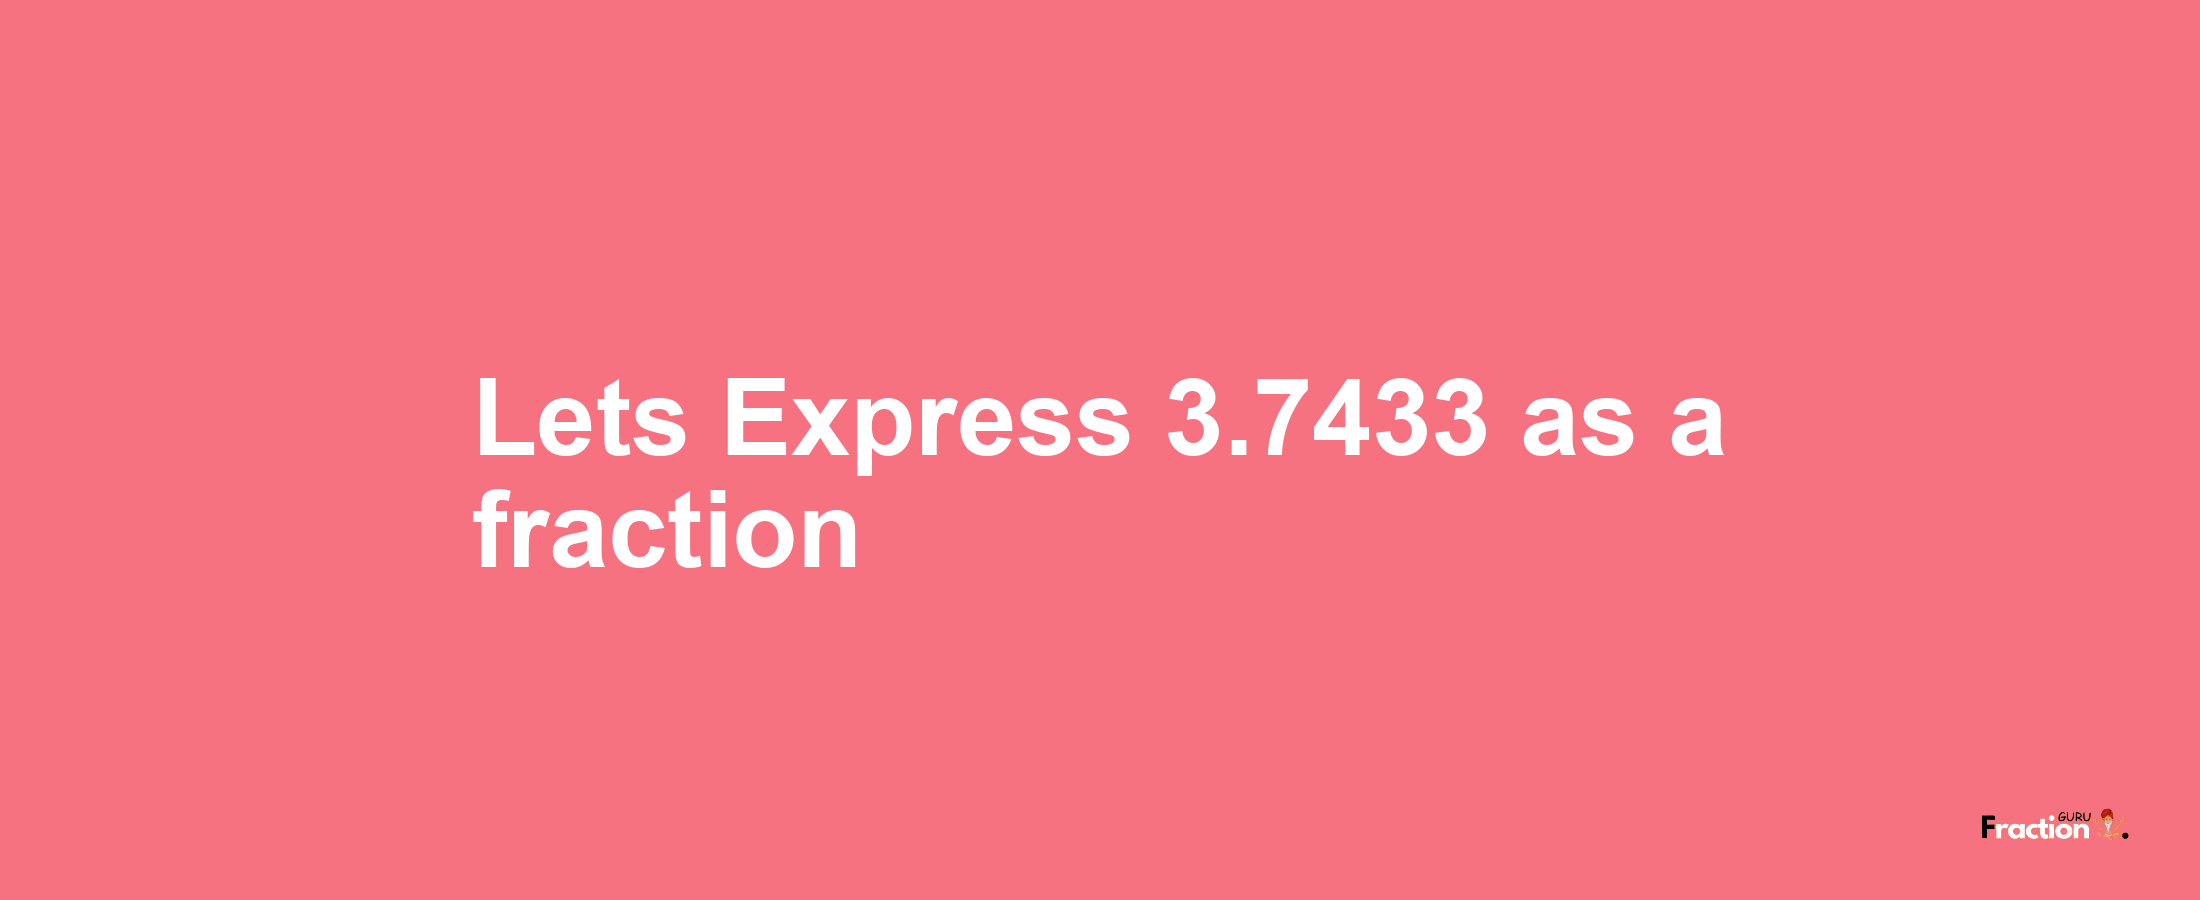 Lets Express 3.7433 as afraction